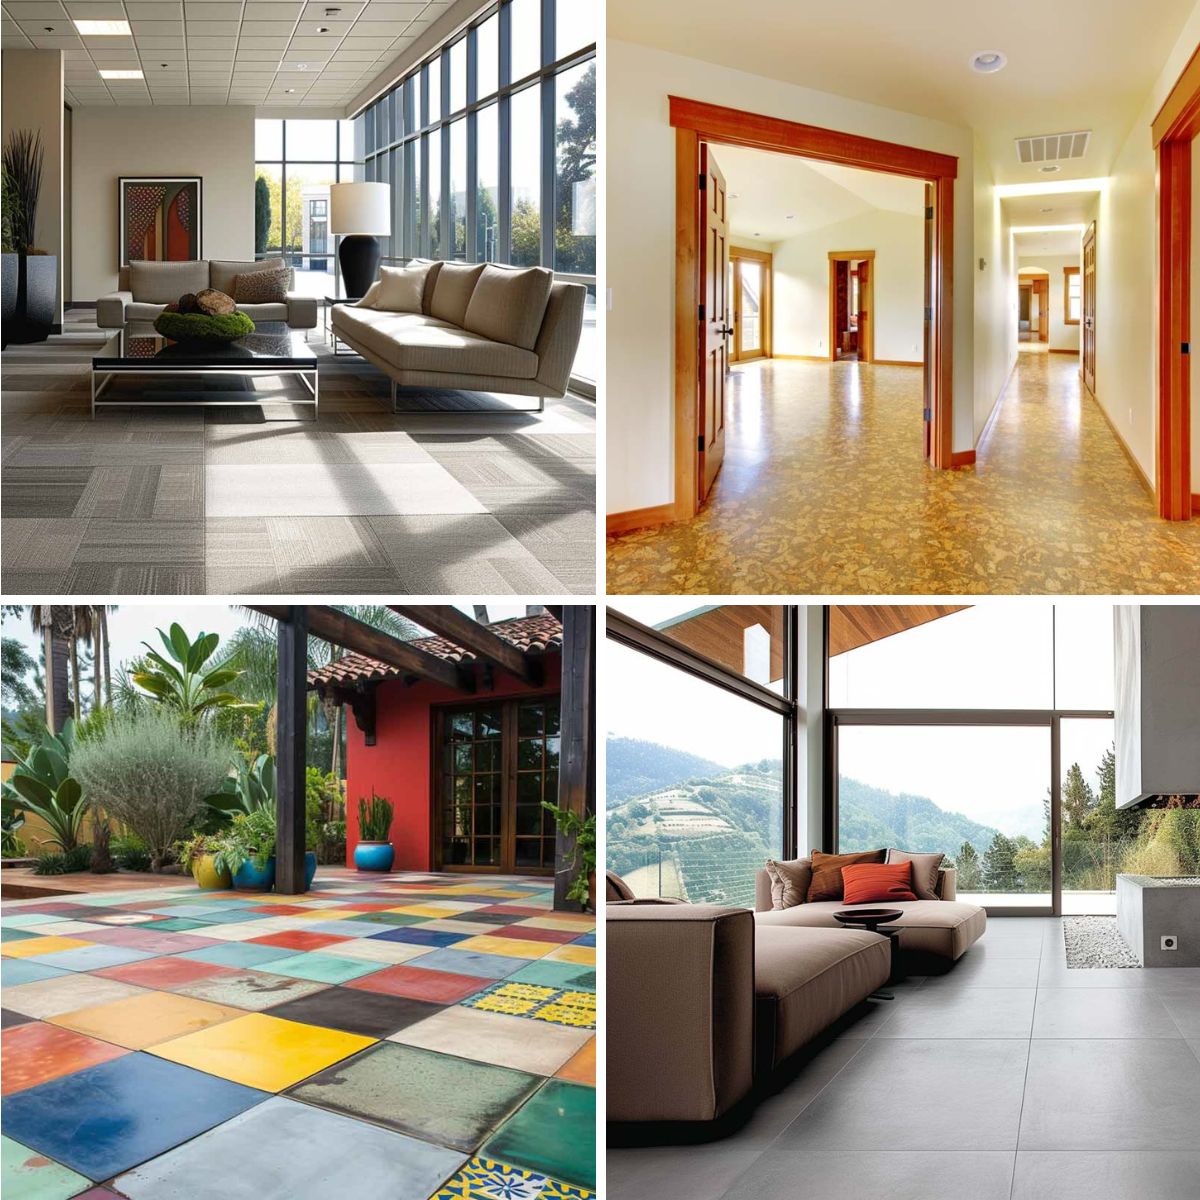 different flooring designs that can install on top of ceramic tiles